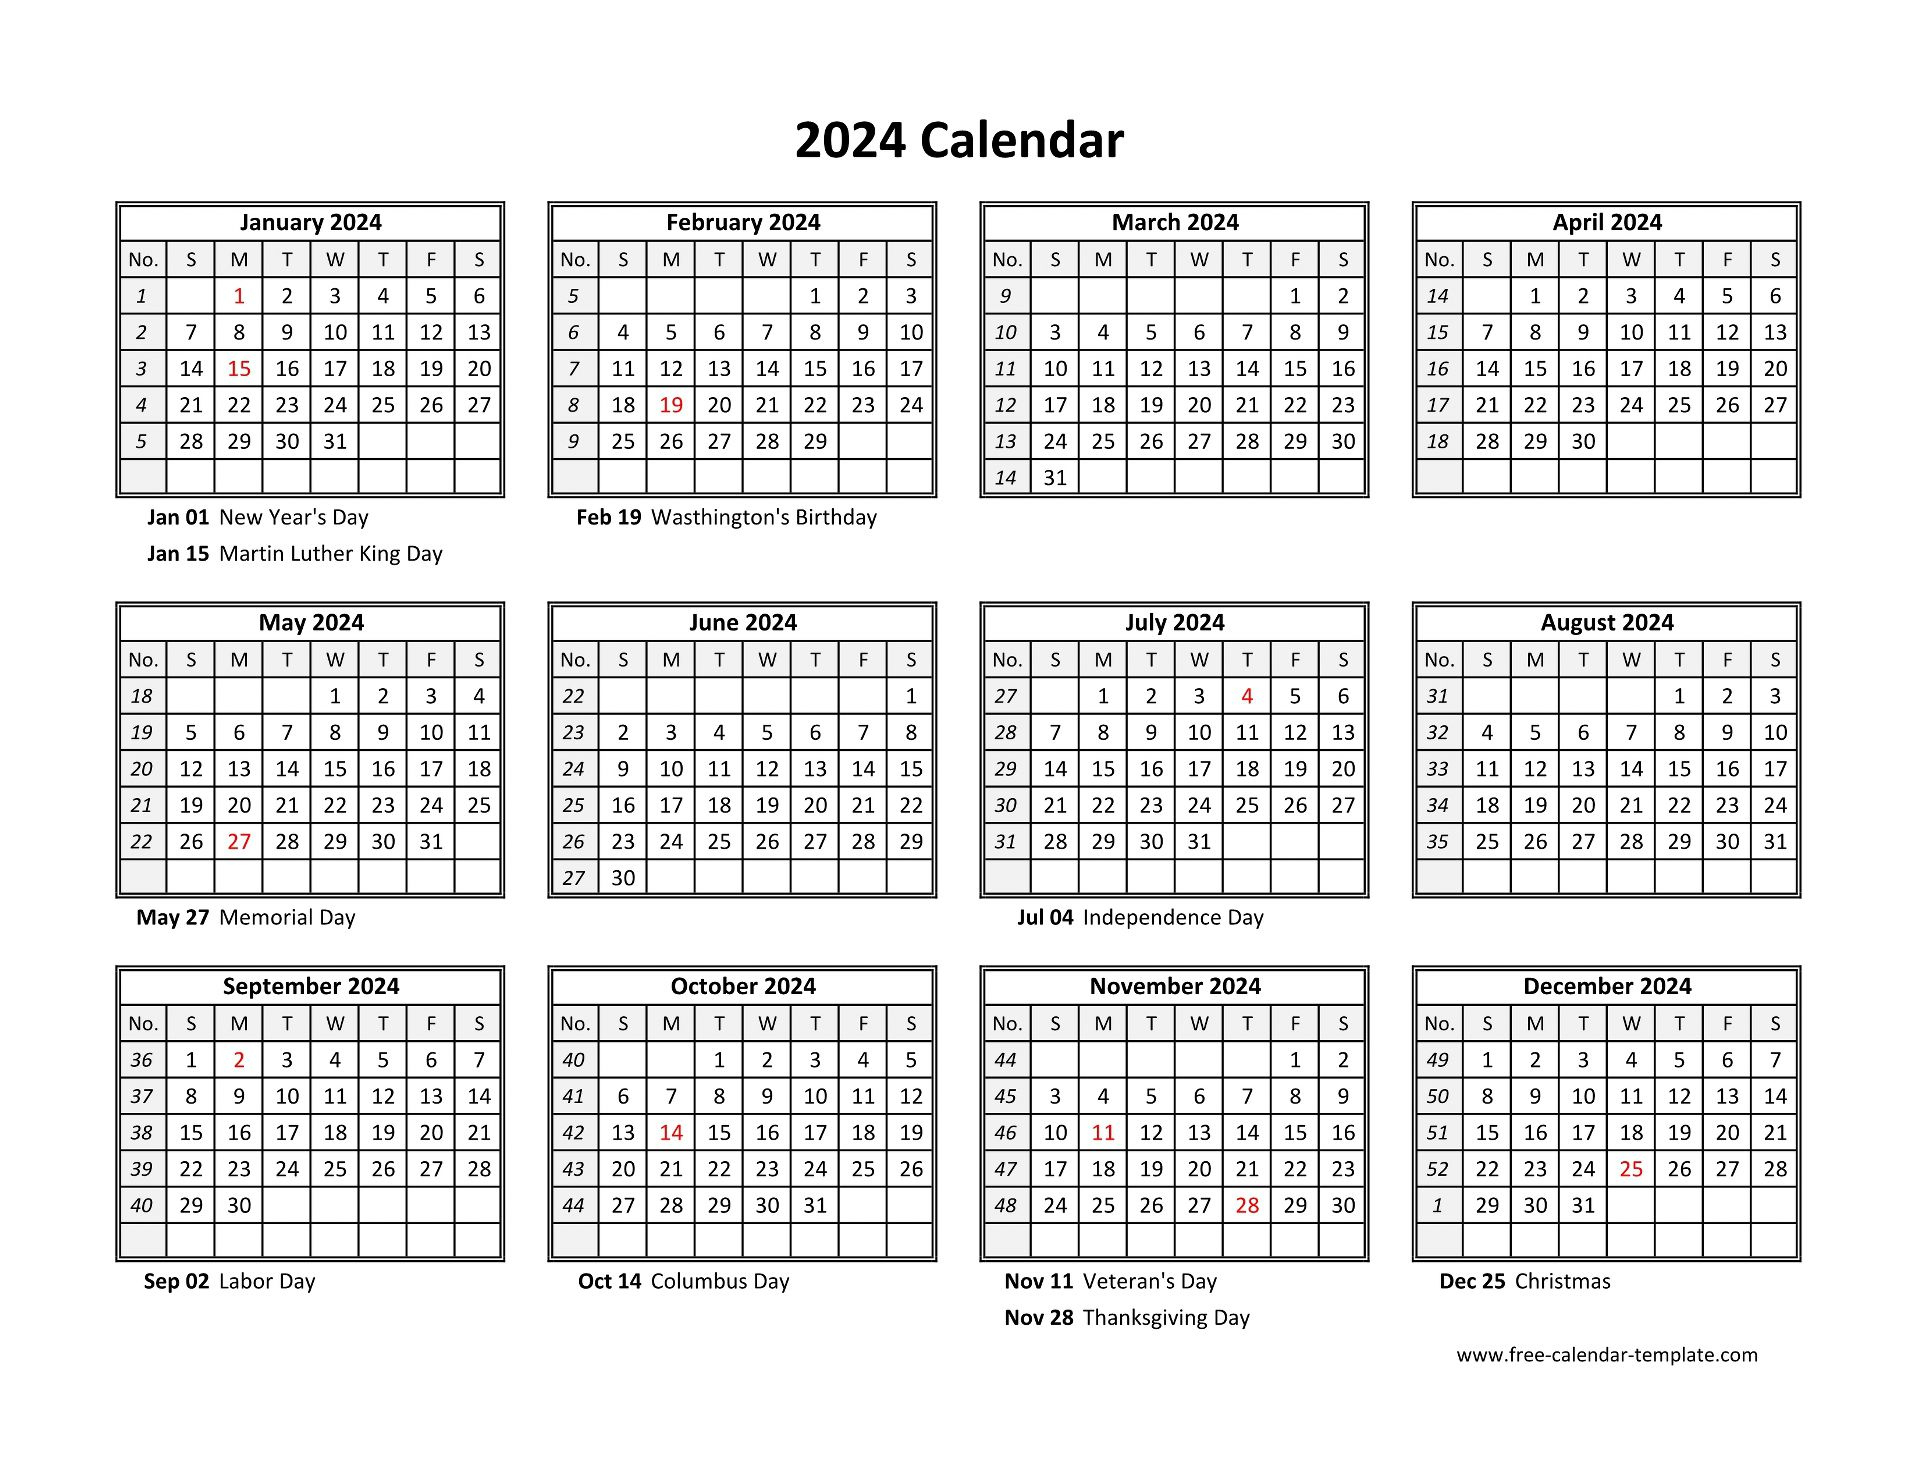 Yearly Calendar 2024 Printable With Federal Holidays | Free | Yearly Printable Calendar 2024